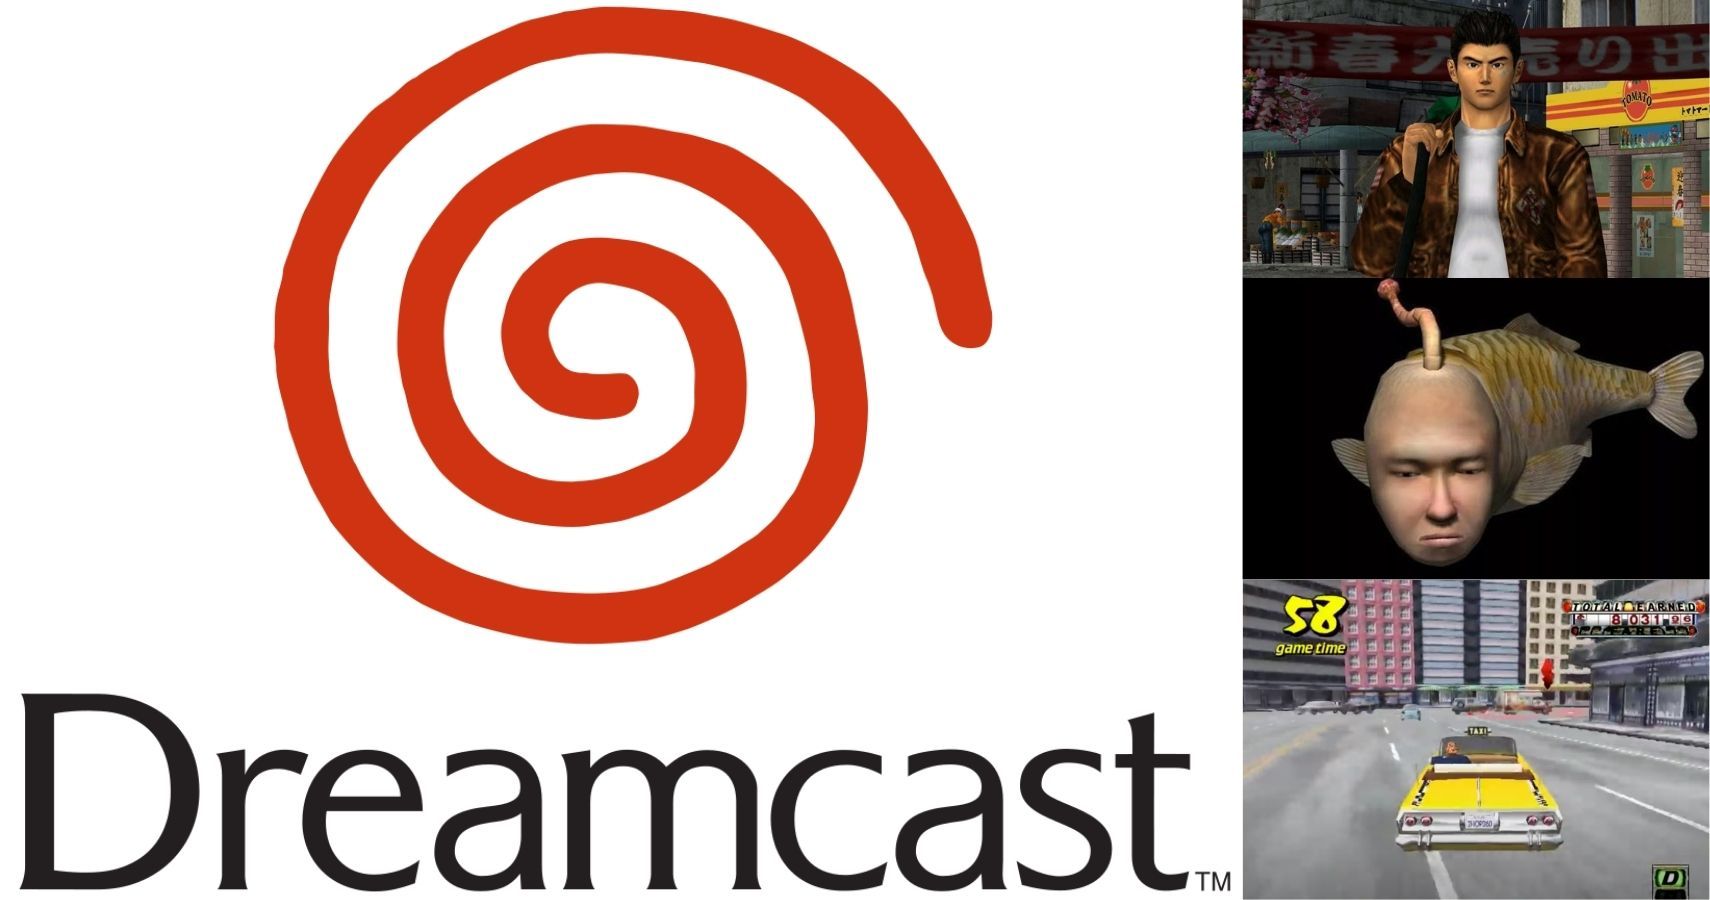 5 Reasons The Sega Dreamcast Is A Forgotten Masterpiece (& 5 Reasons Why It Struggled)